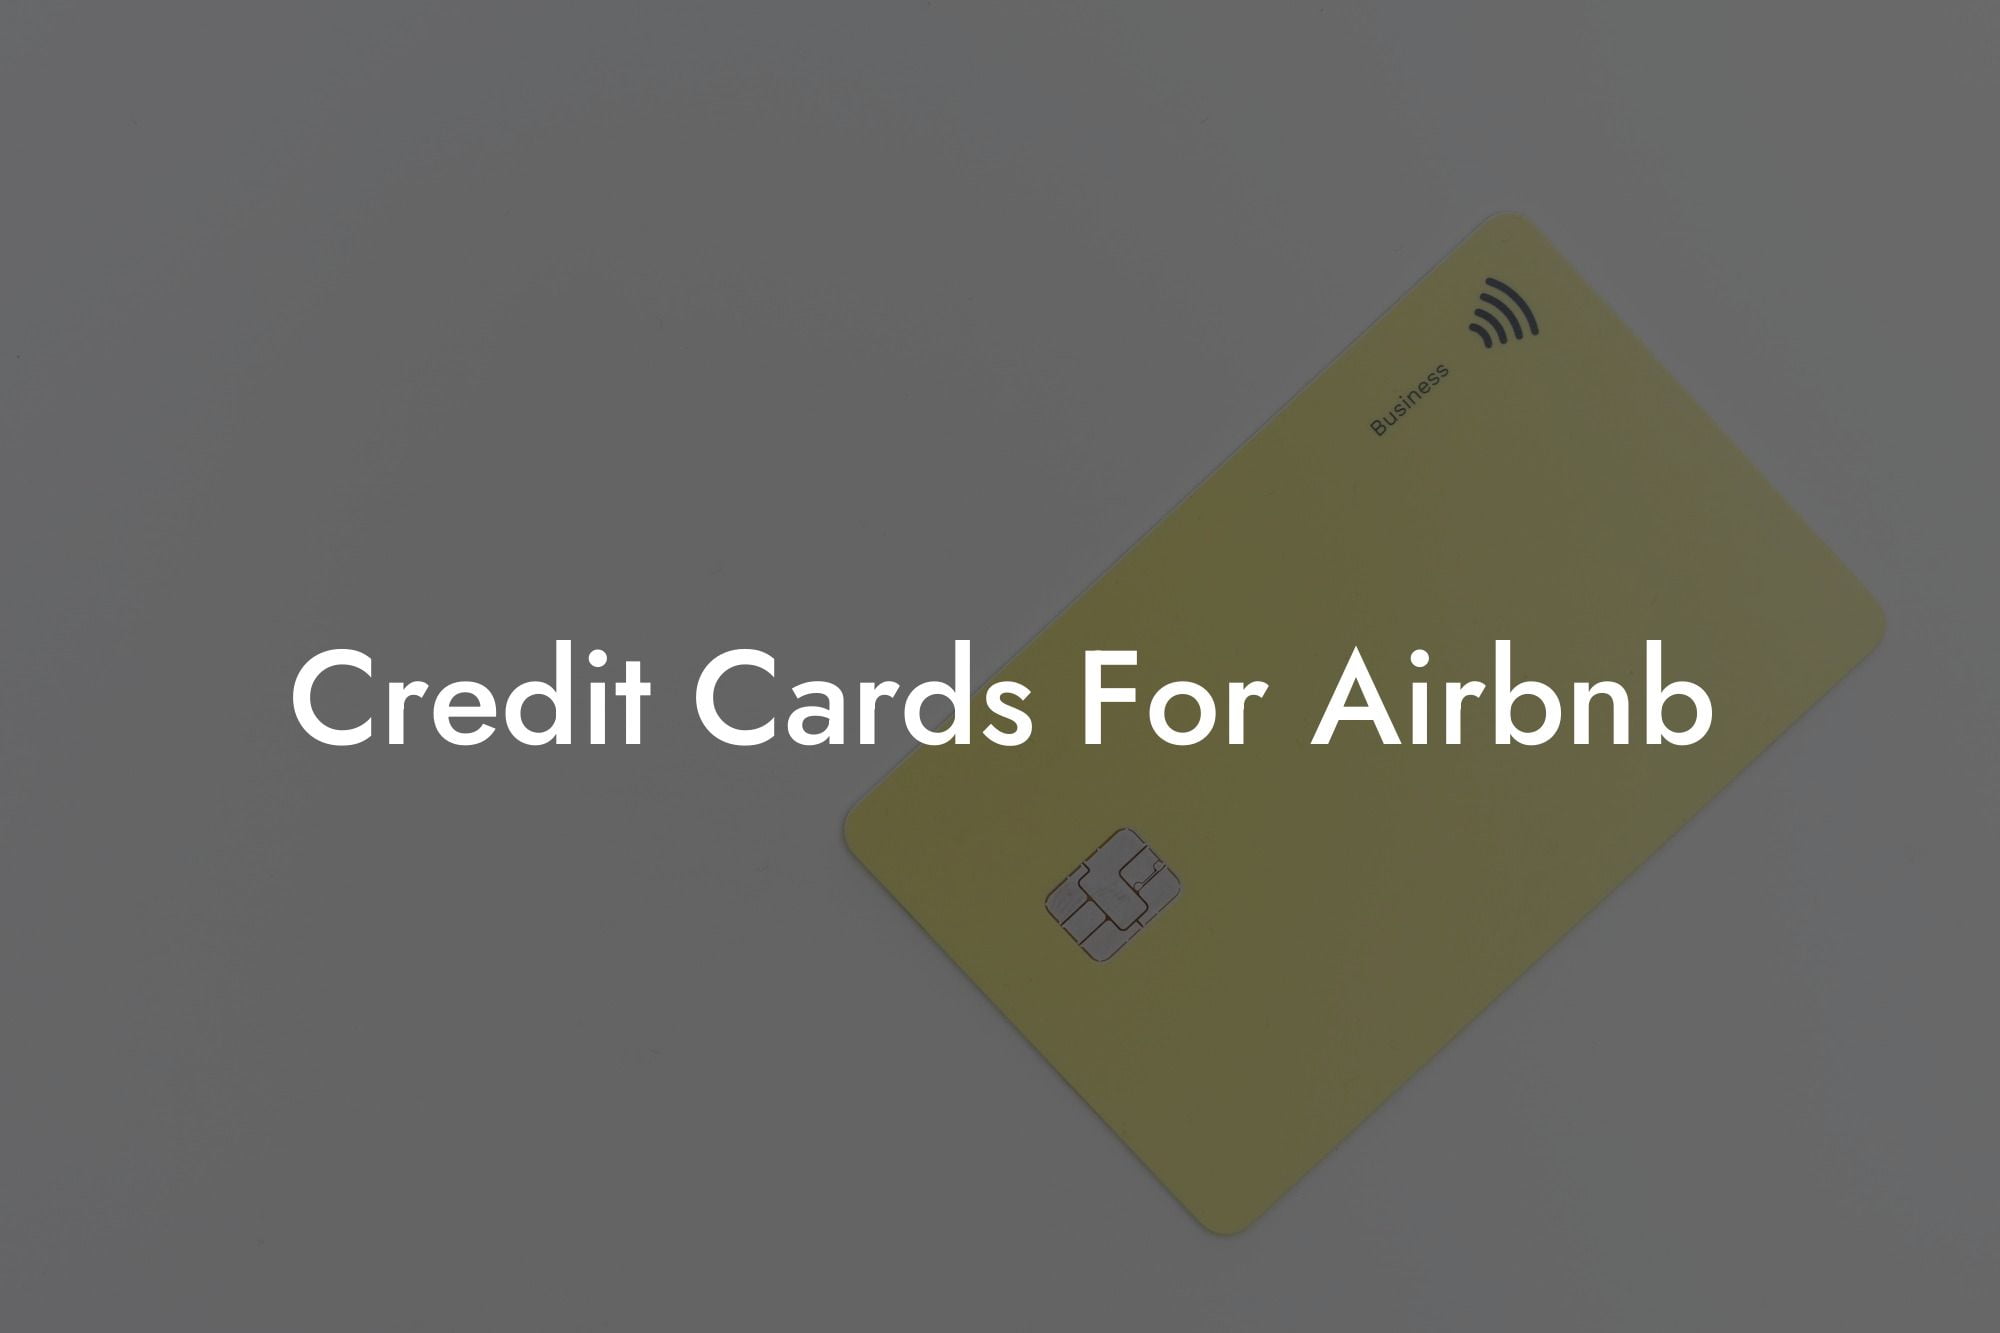 Credit Cards For Airbnb